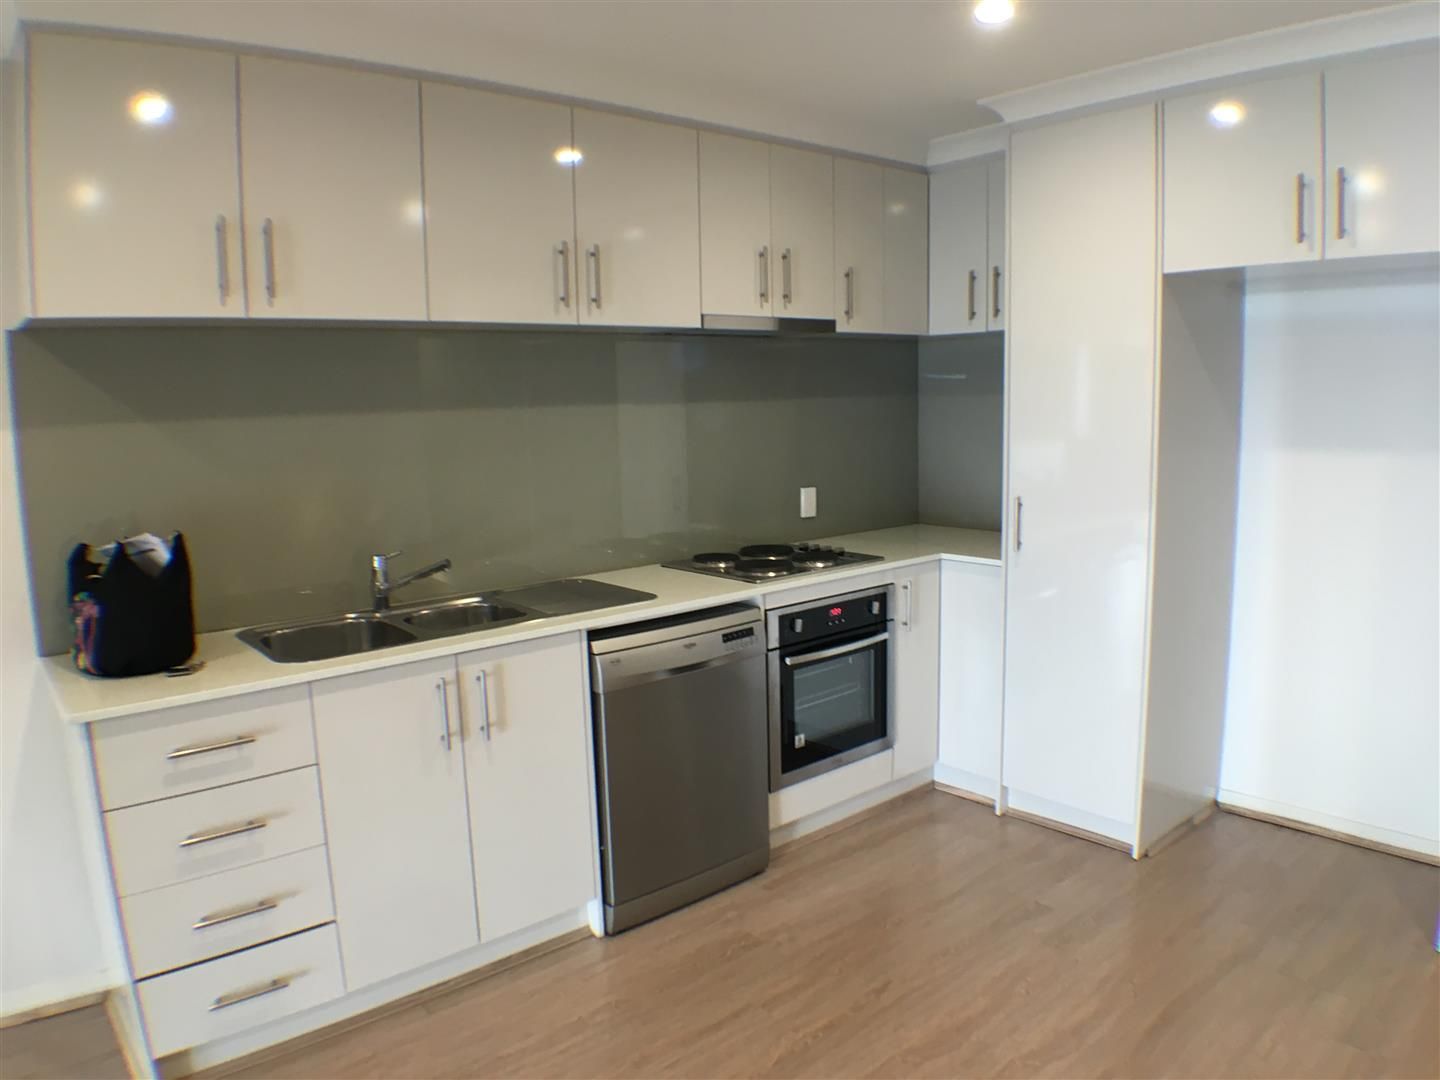 2 bedrooms Apartment / Unit / Flat in 1/5 Parkview Parade REDCLIFFE WA, 6104